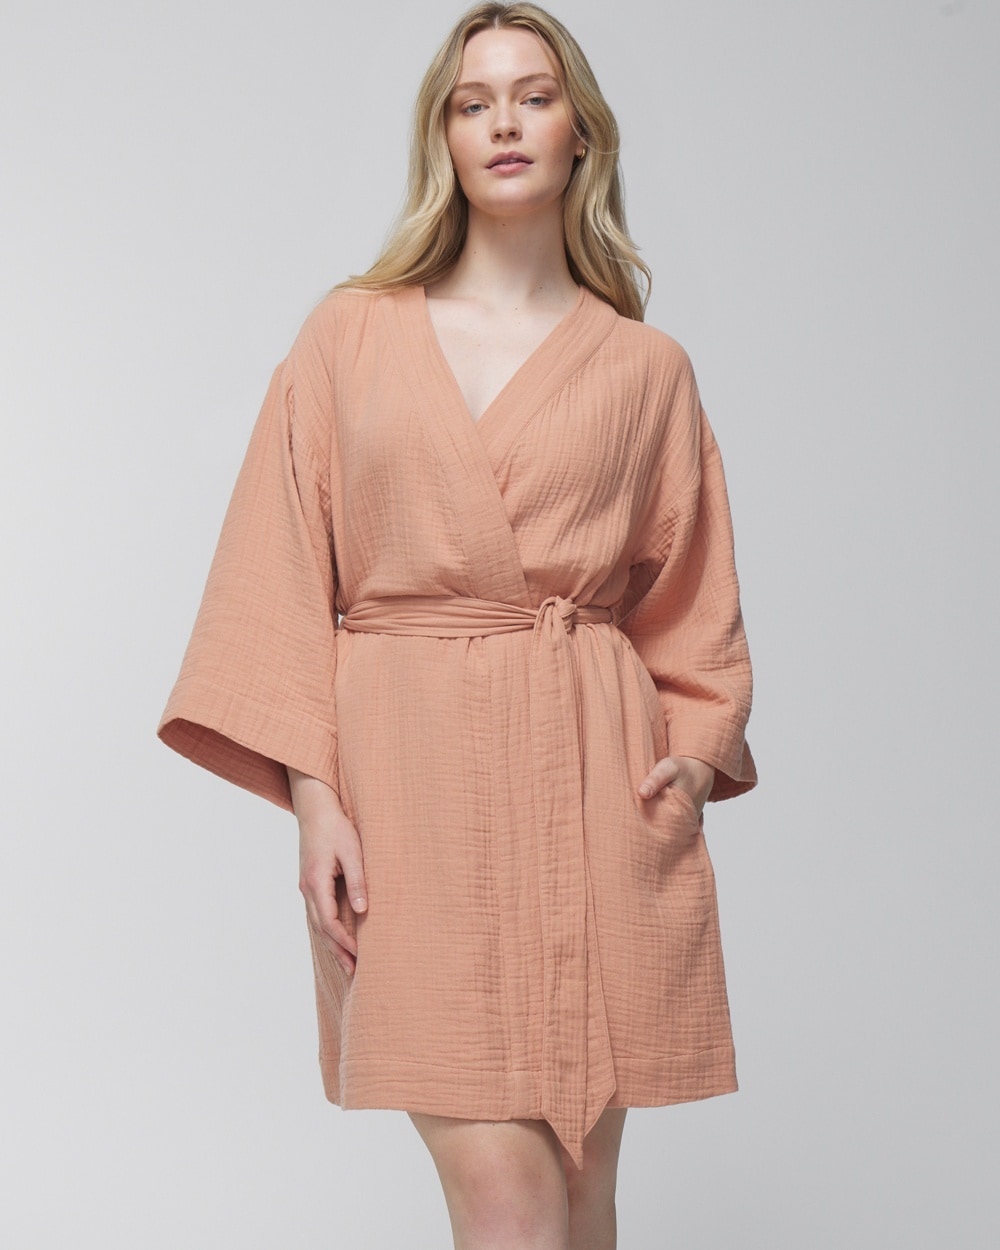 Soma Women's Textured Cotton Robe In Nude Size Small/medium |  In Creme Brulee